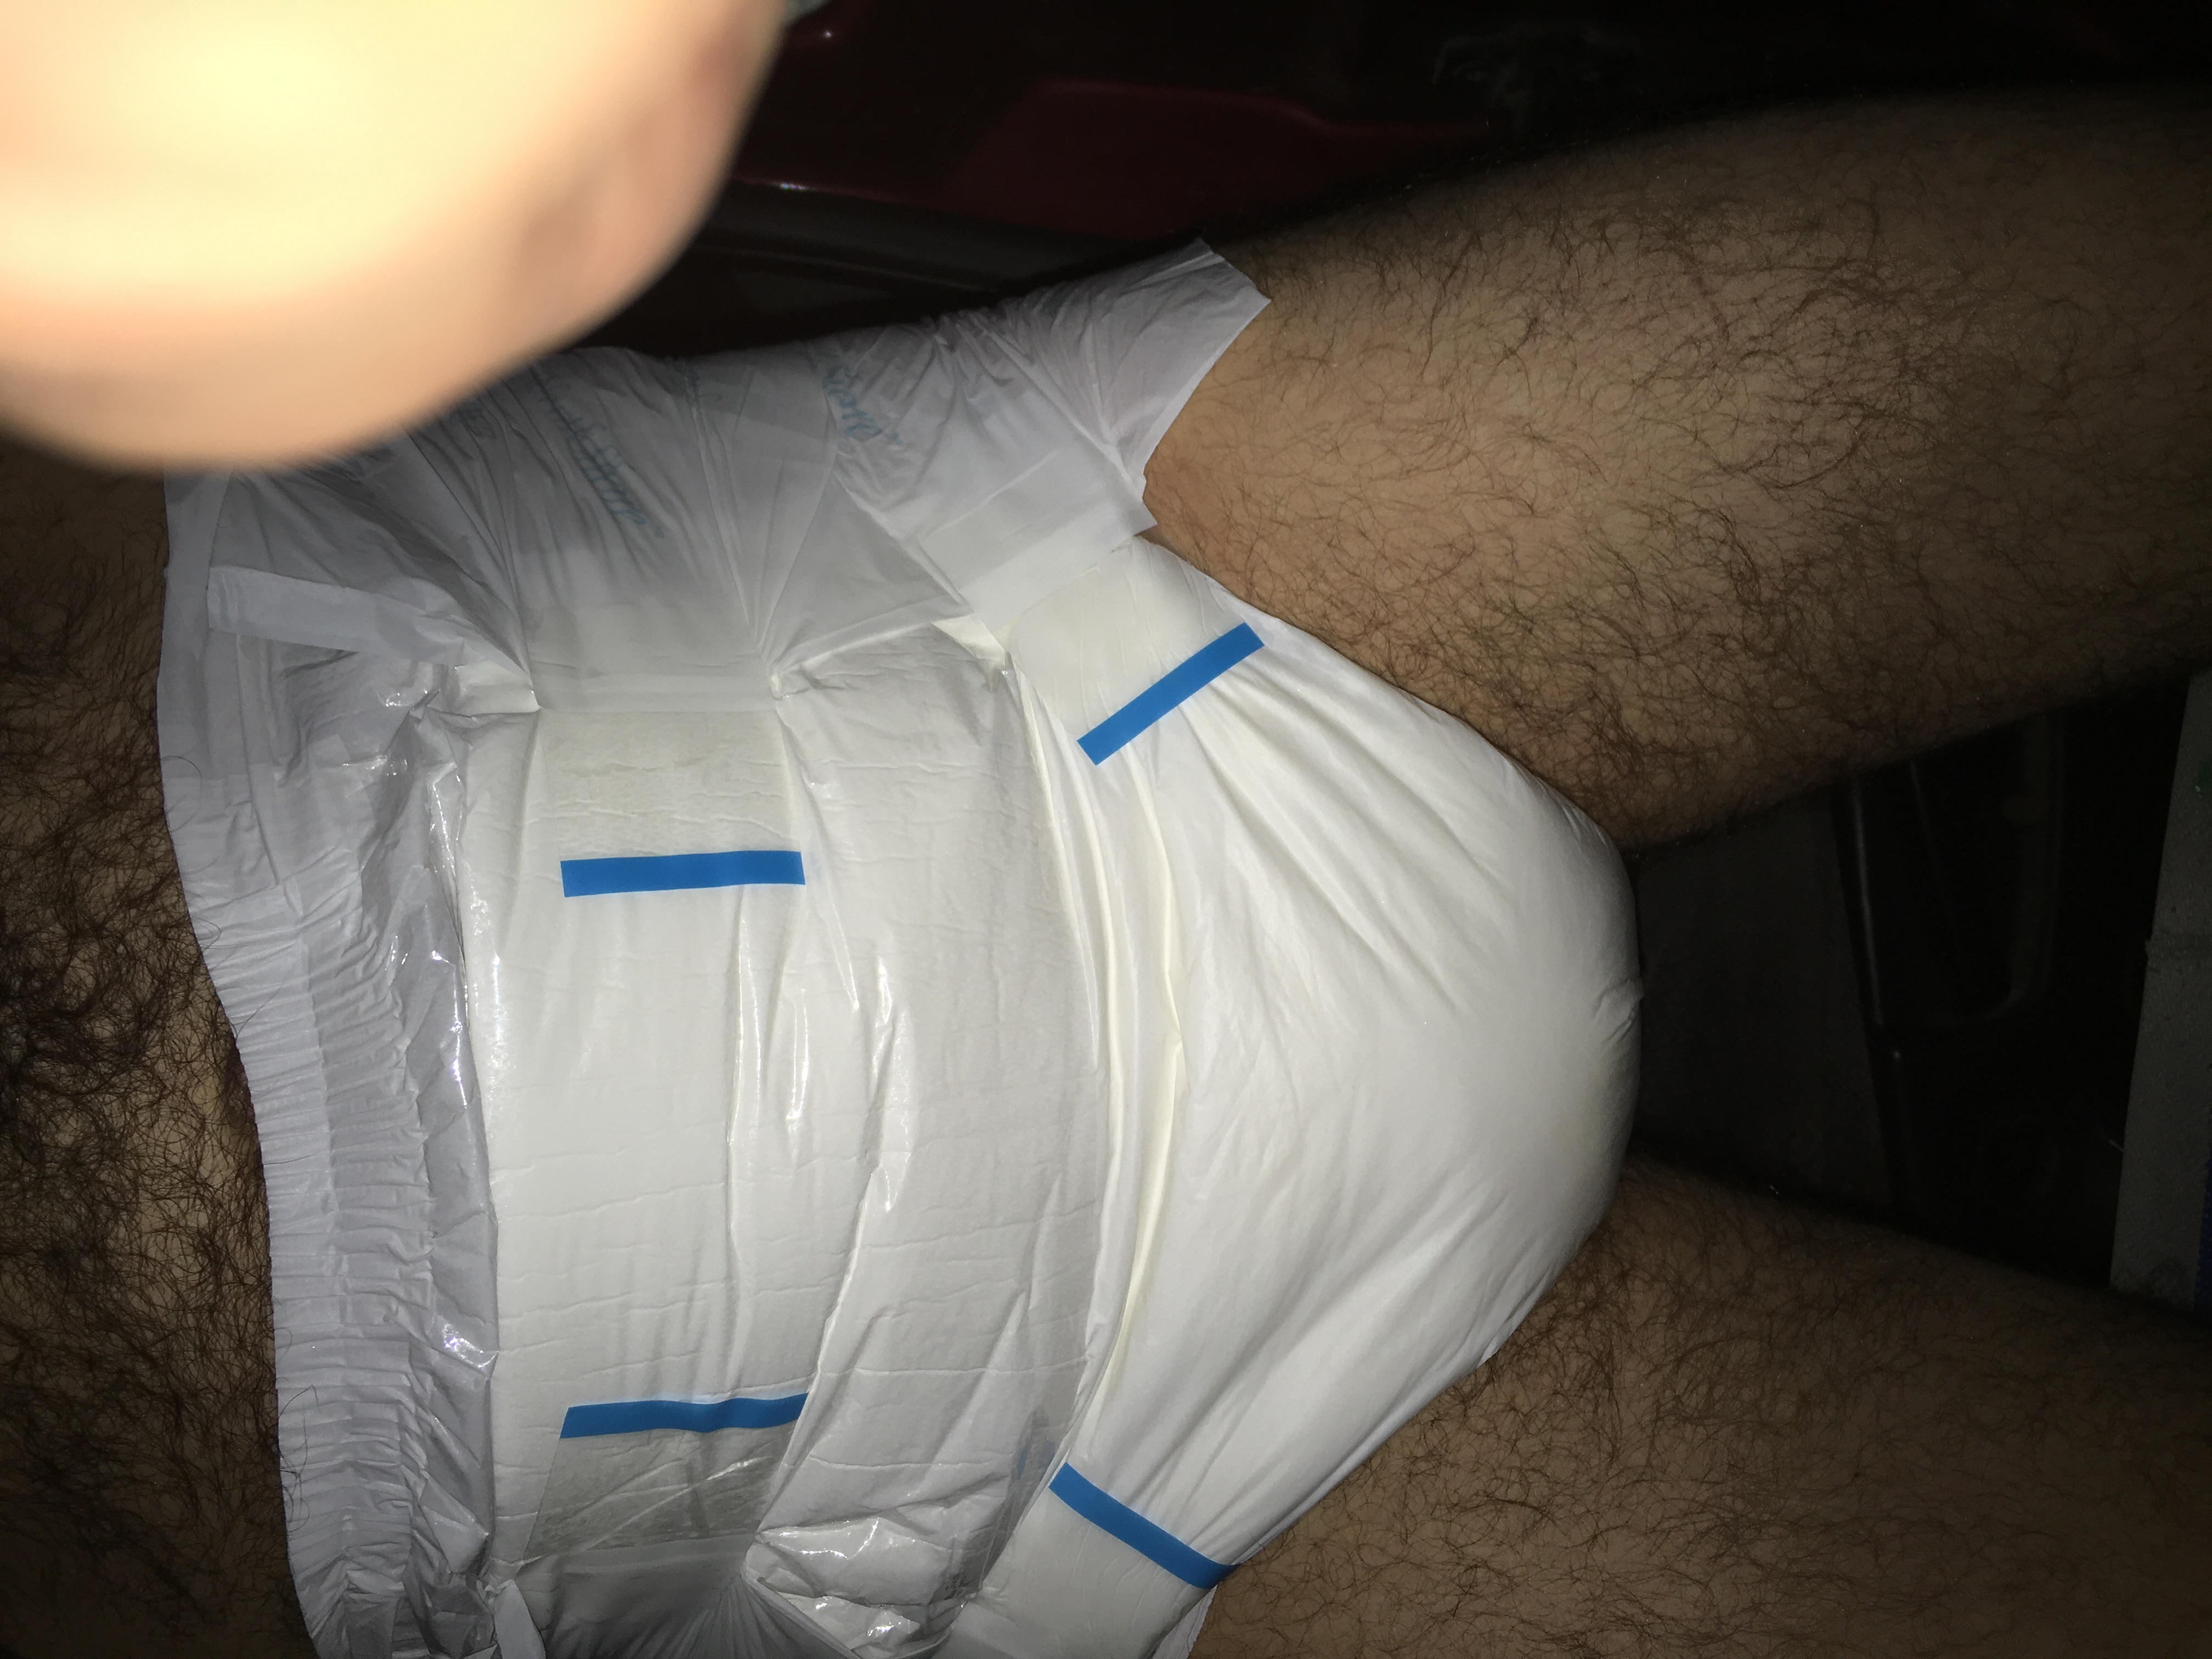 Diapered - video 4